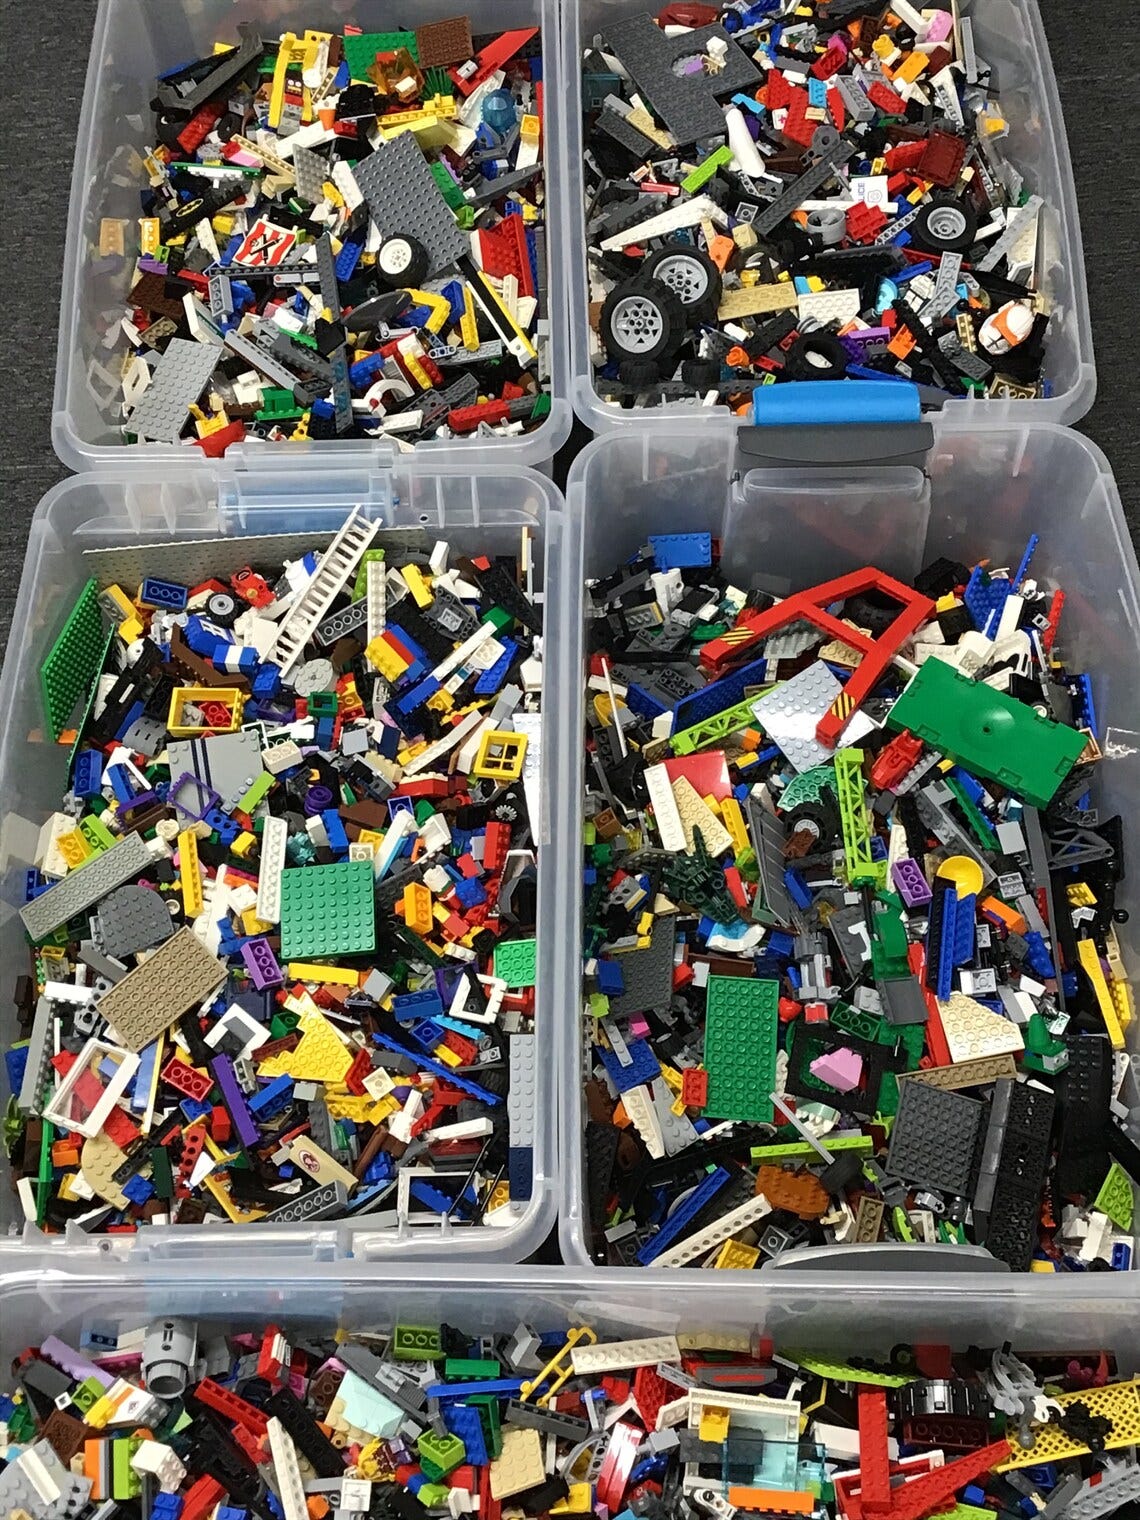 500 LEGO Pieces One Pound per Order Fun gift random bricks & parts assortment Buy more and SAVE image 1